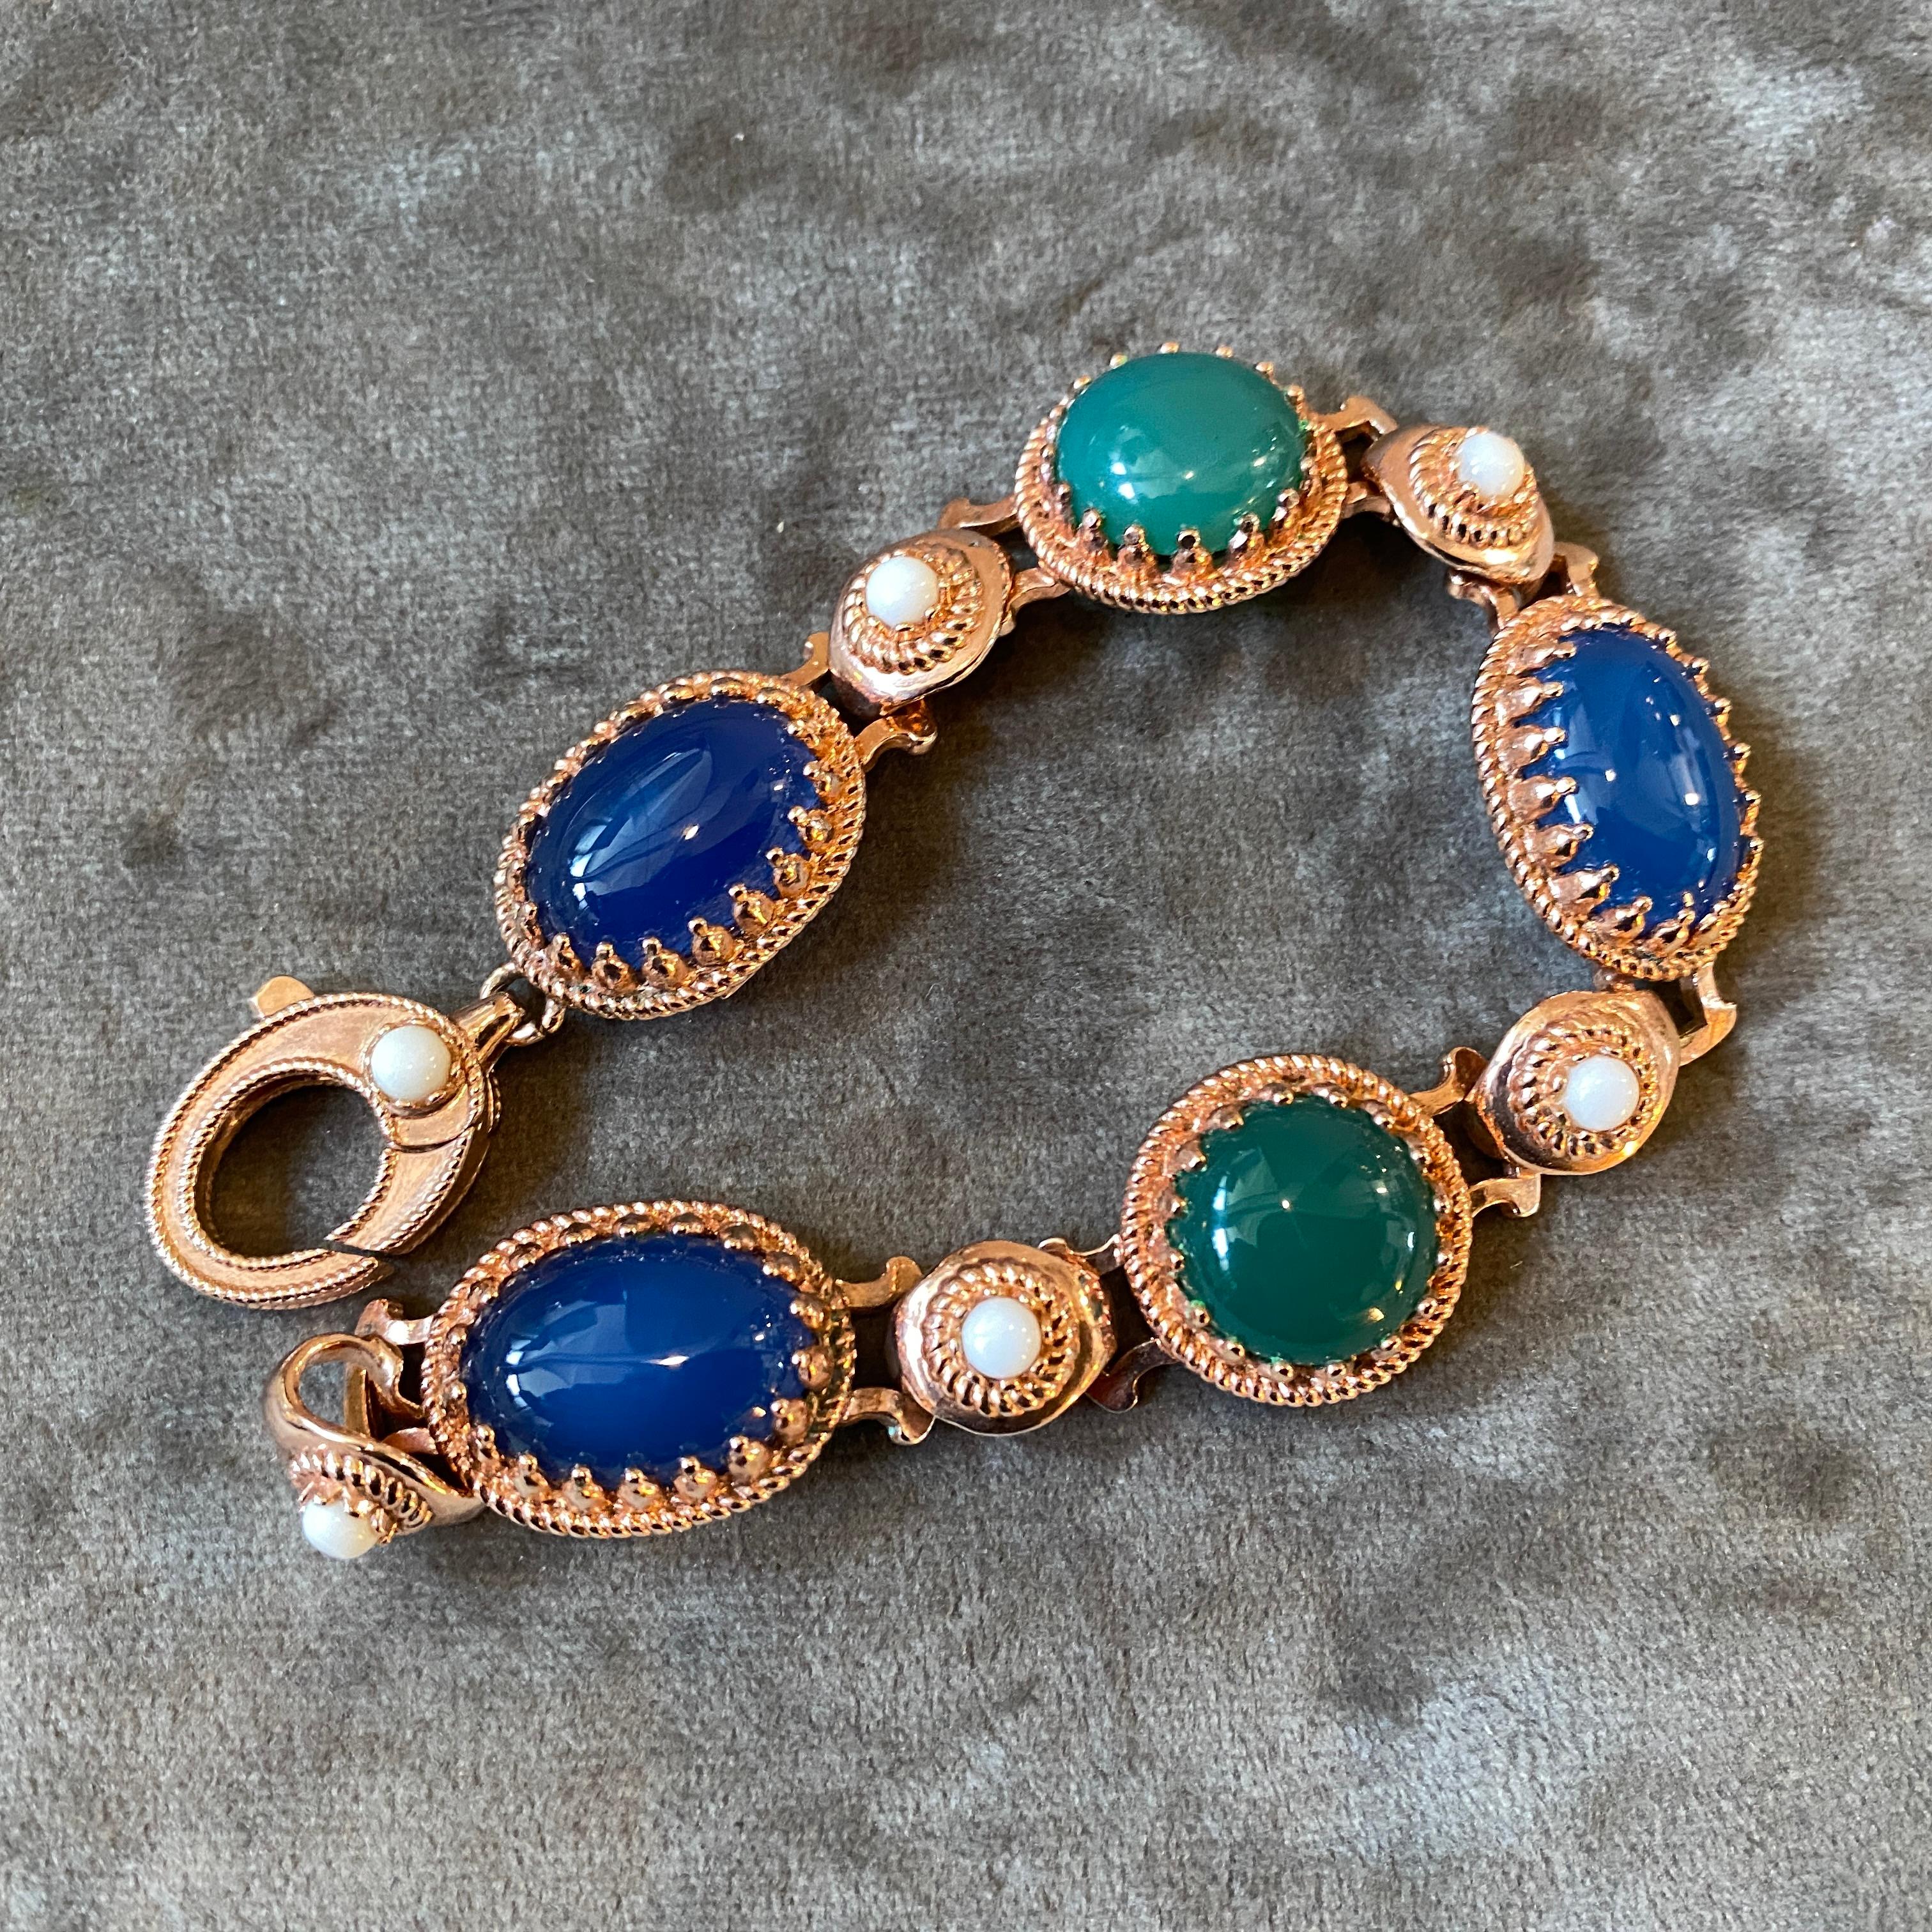 Cabochon 1990s Green and Blue Agate and Bronze Italian Bracelet by Anomis